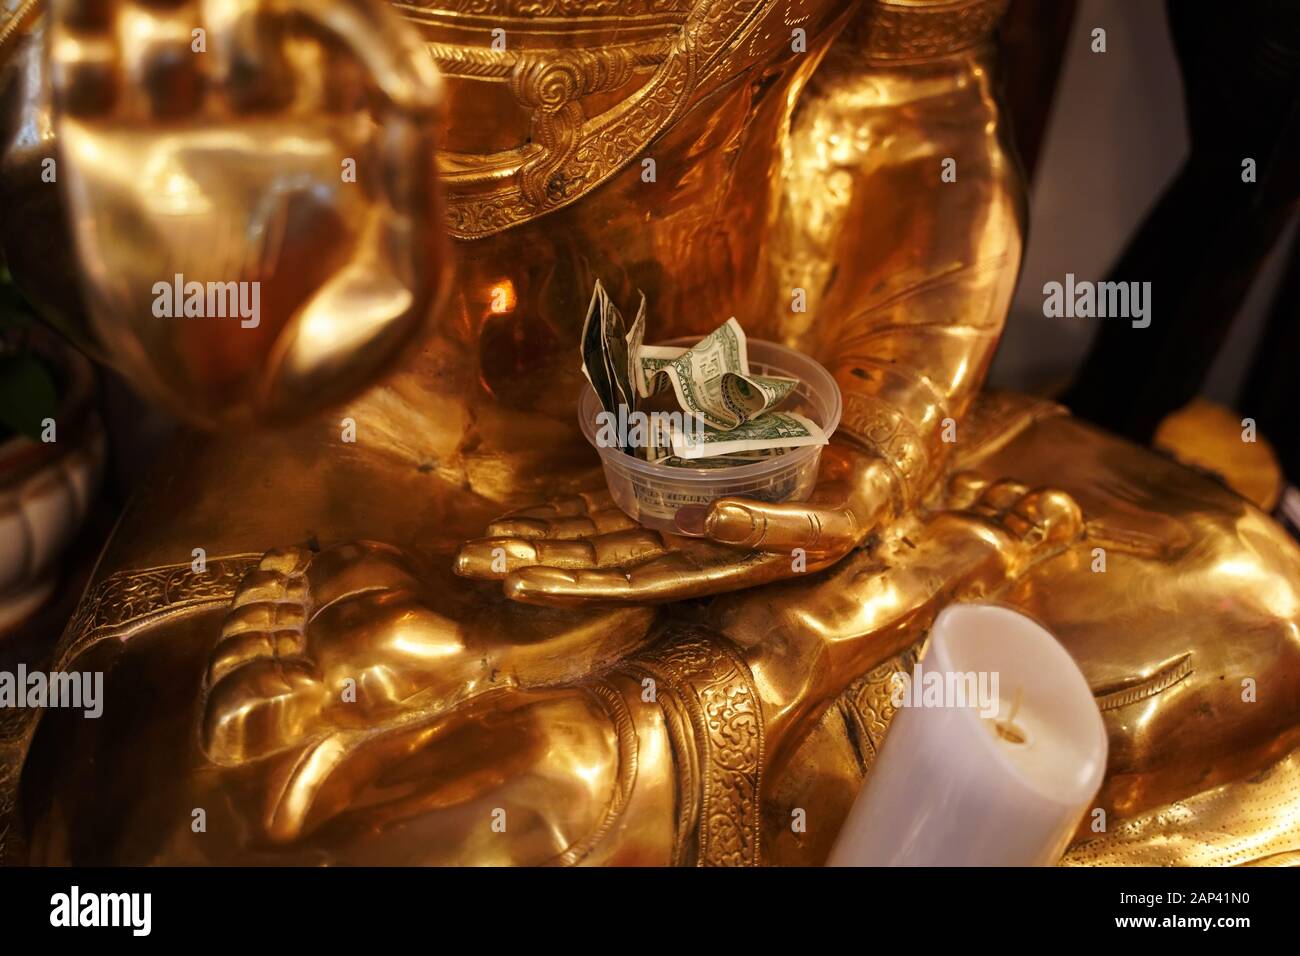 Dollar bills in a plastic container in the hand of Lakshmi, Hindu goddess of wealth, fortune and prosperity. Stock Photo